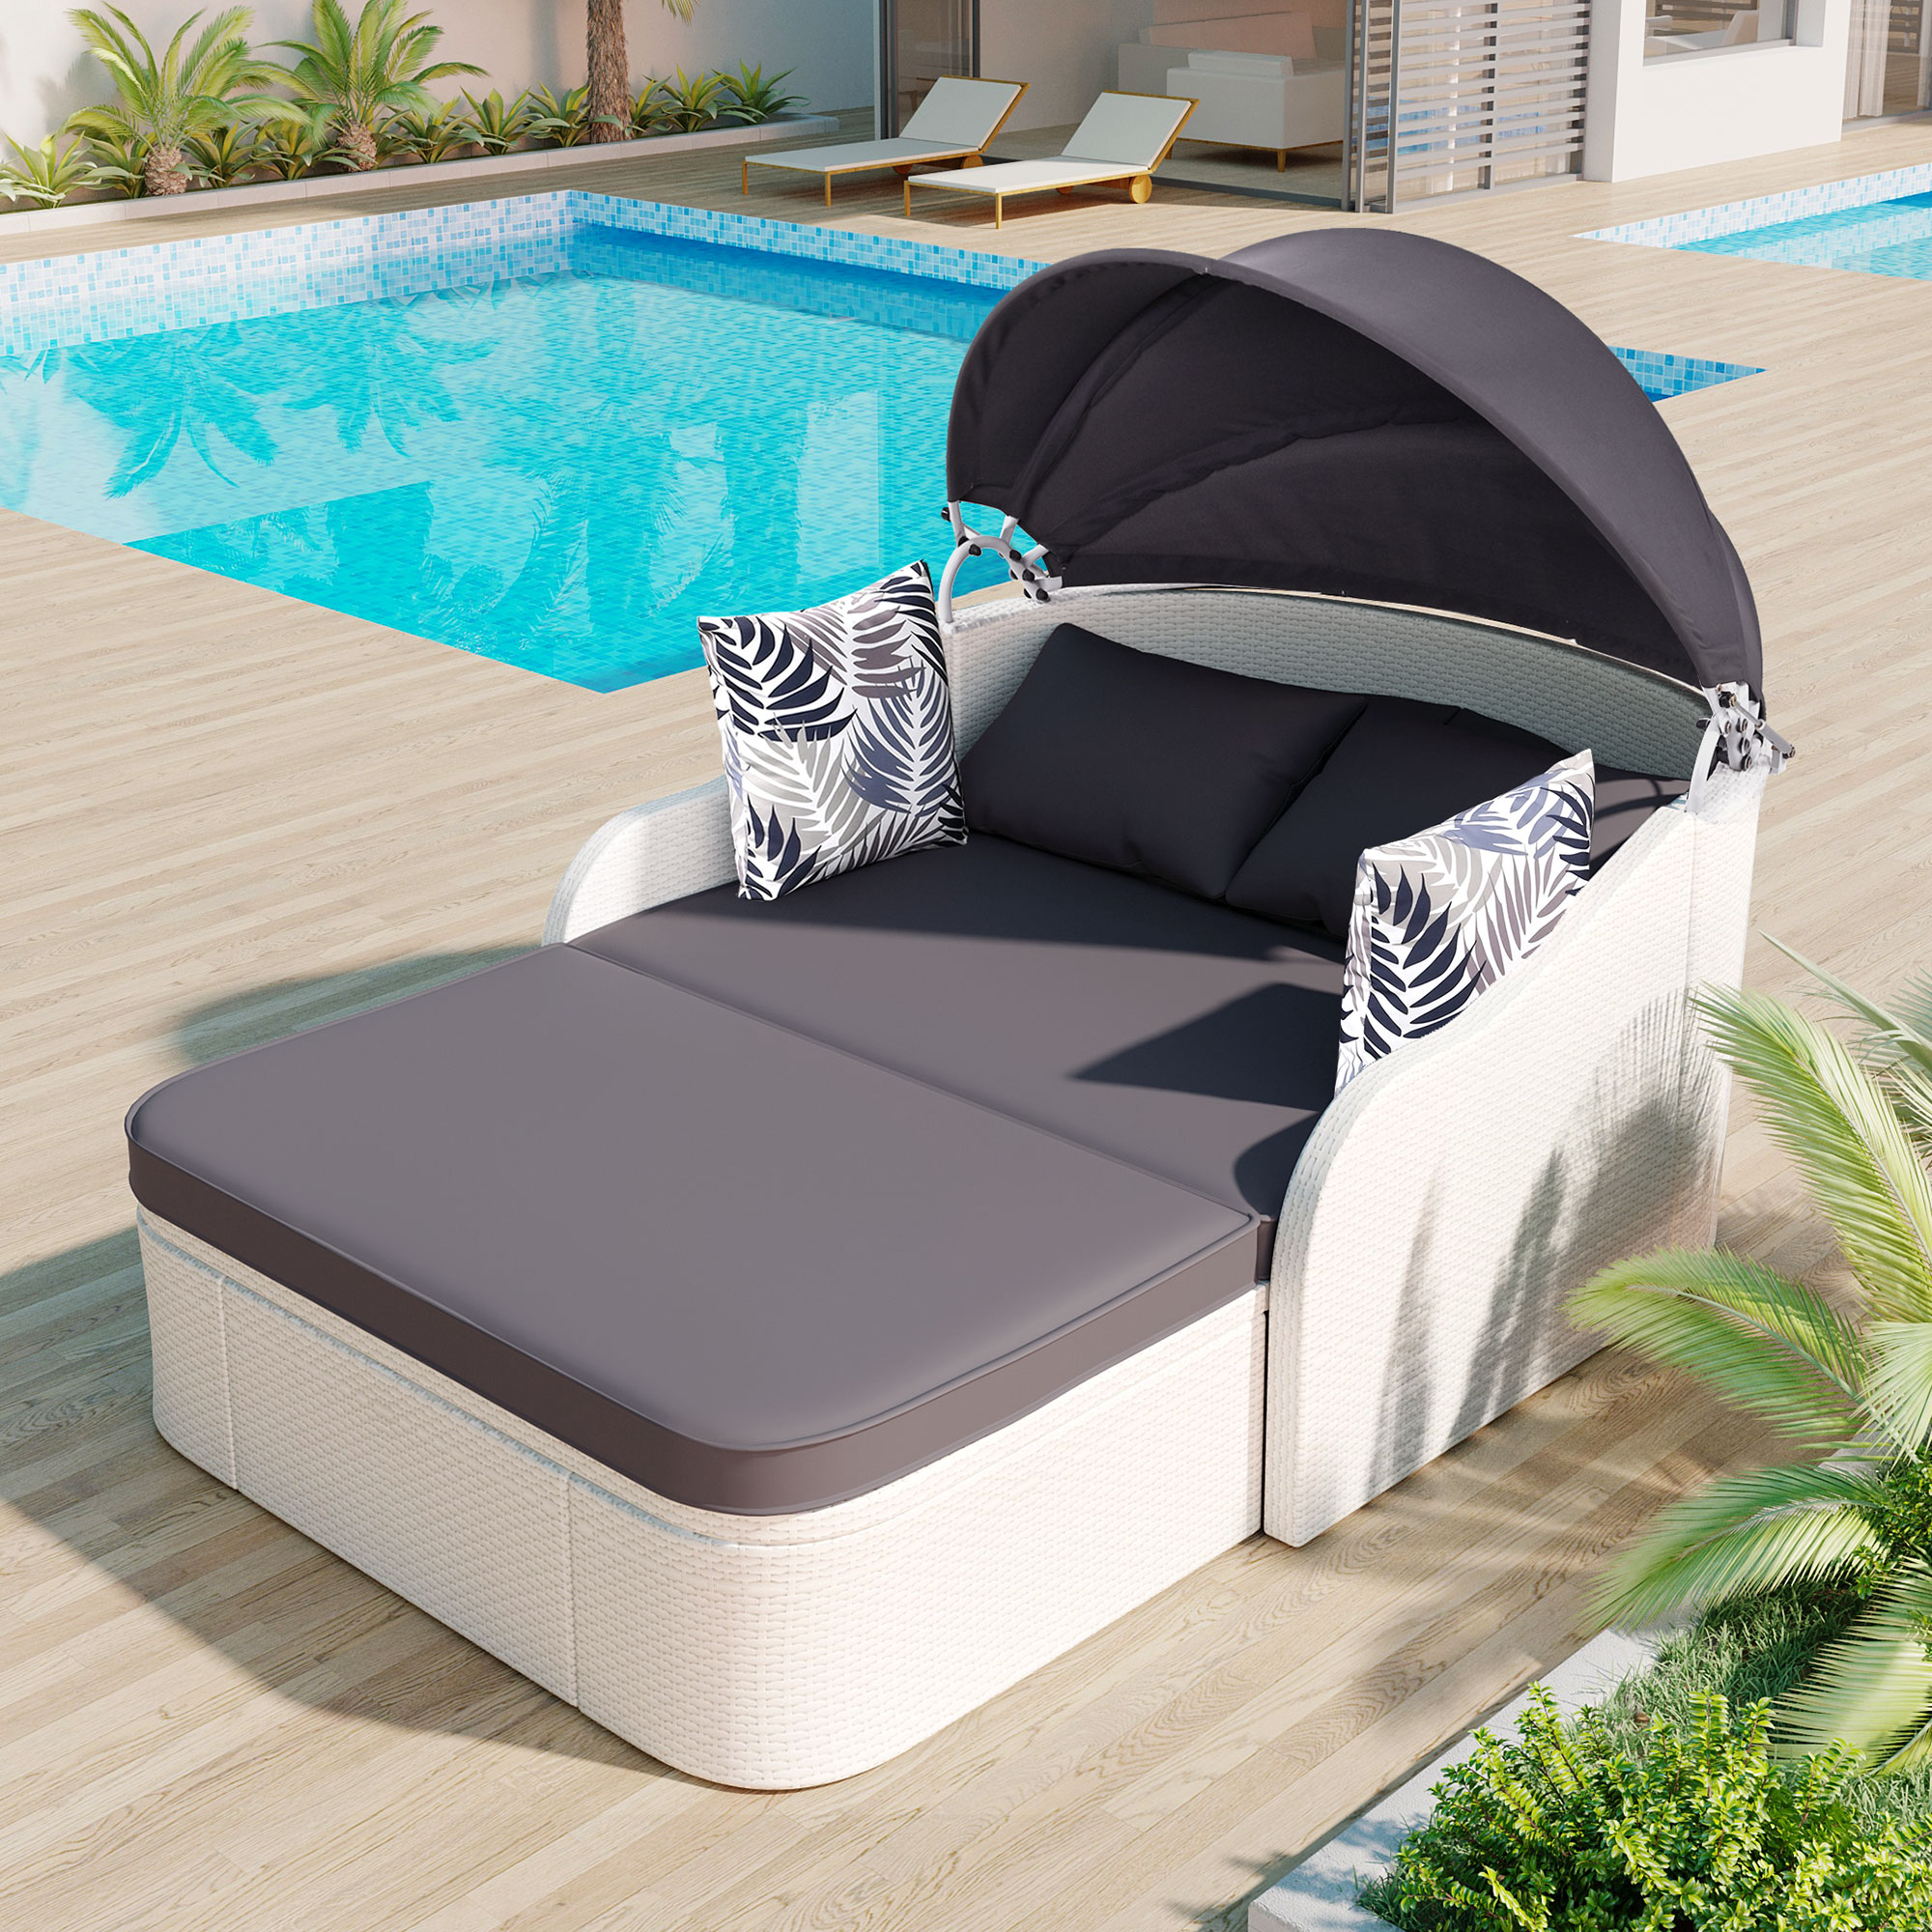 Seizeen Outdoor Rattan Chaise Lounge, 2-Person Reclining Daybed with Adjustable Canopy and Gray Cushions, Multifunction PE Wicker Furniture w/ Cover, White - image 1 of 13